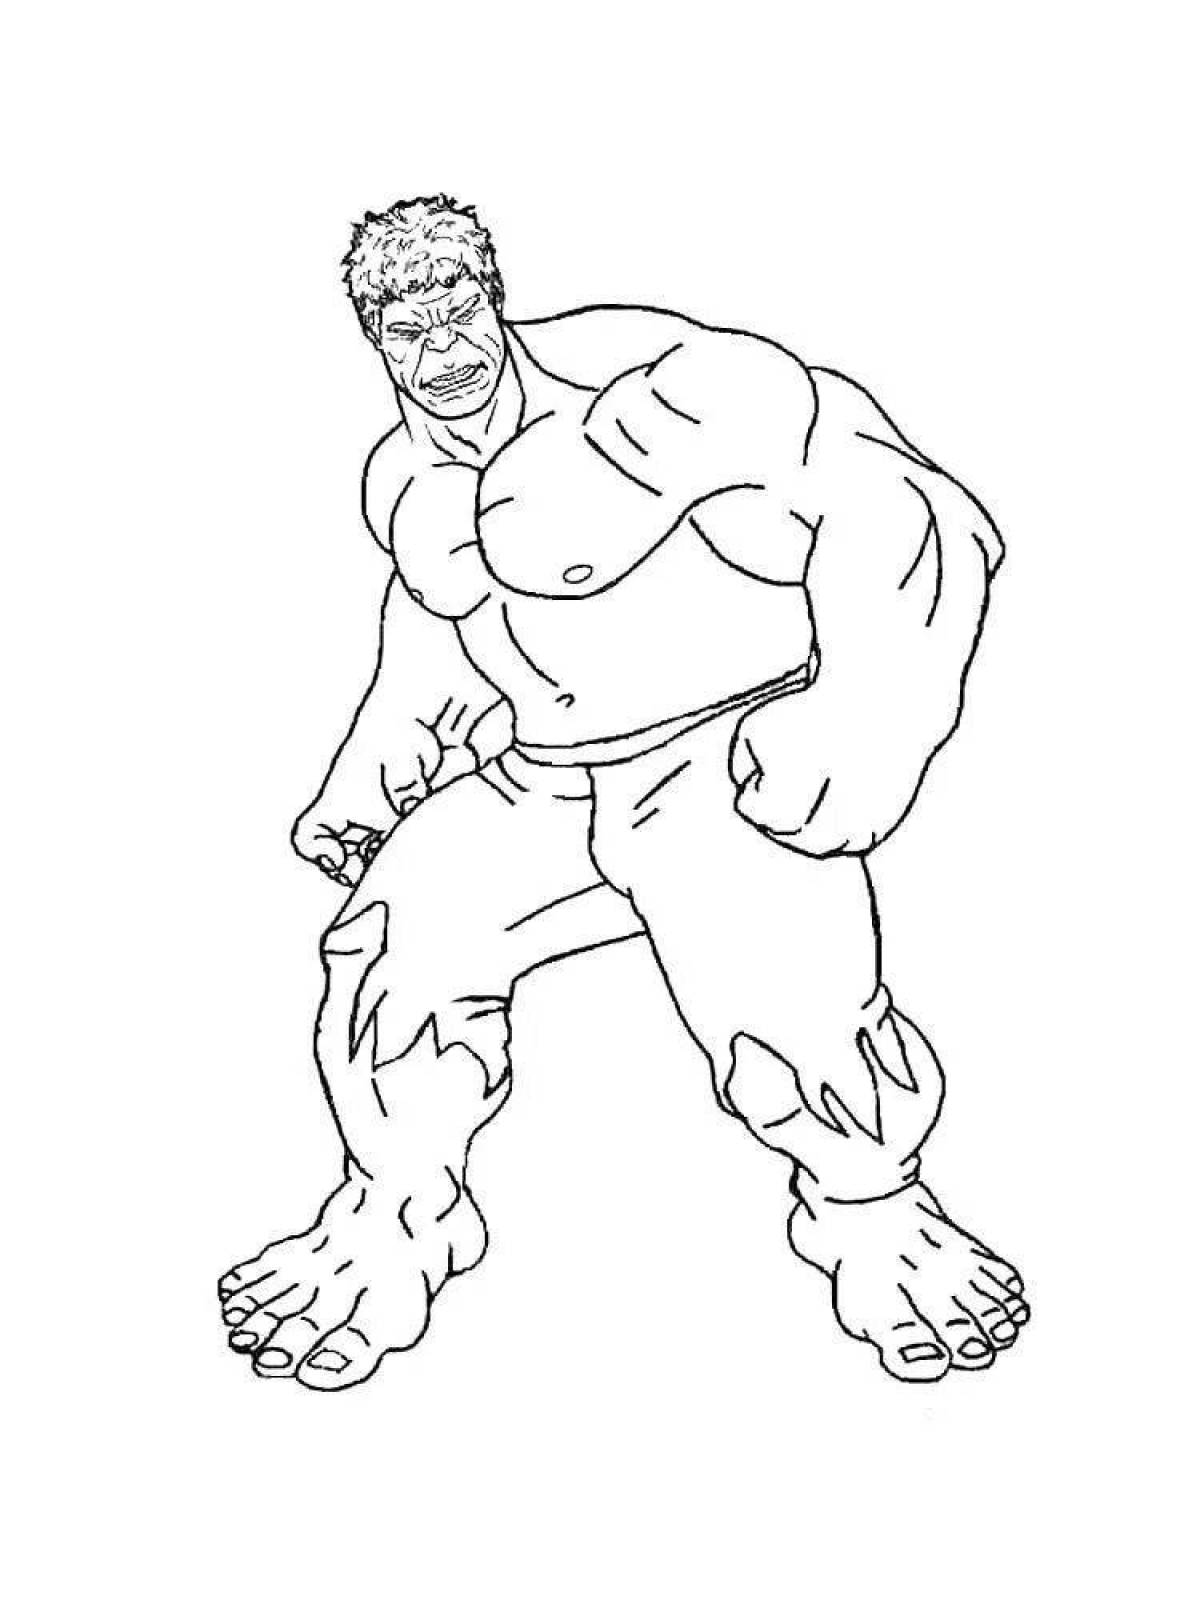 Hulk for kids 3 4 years old #3